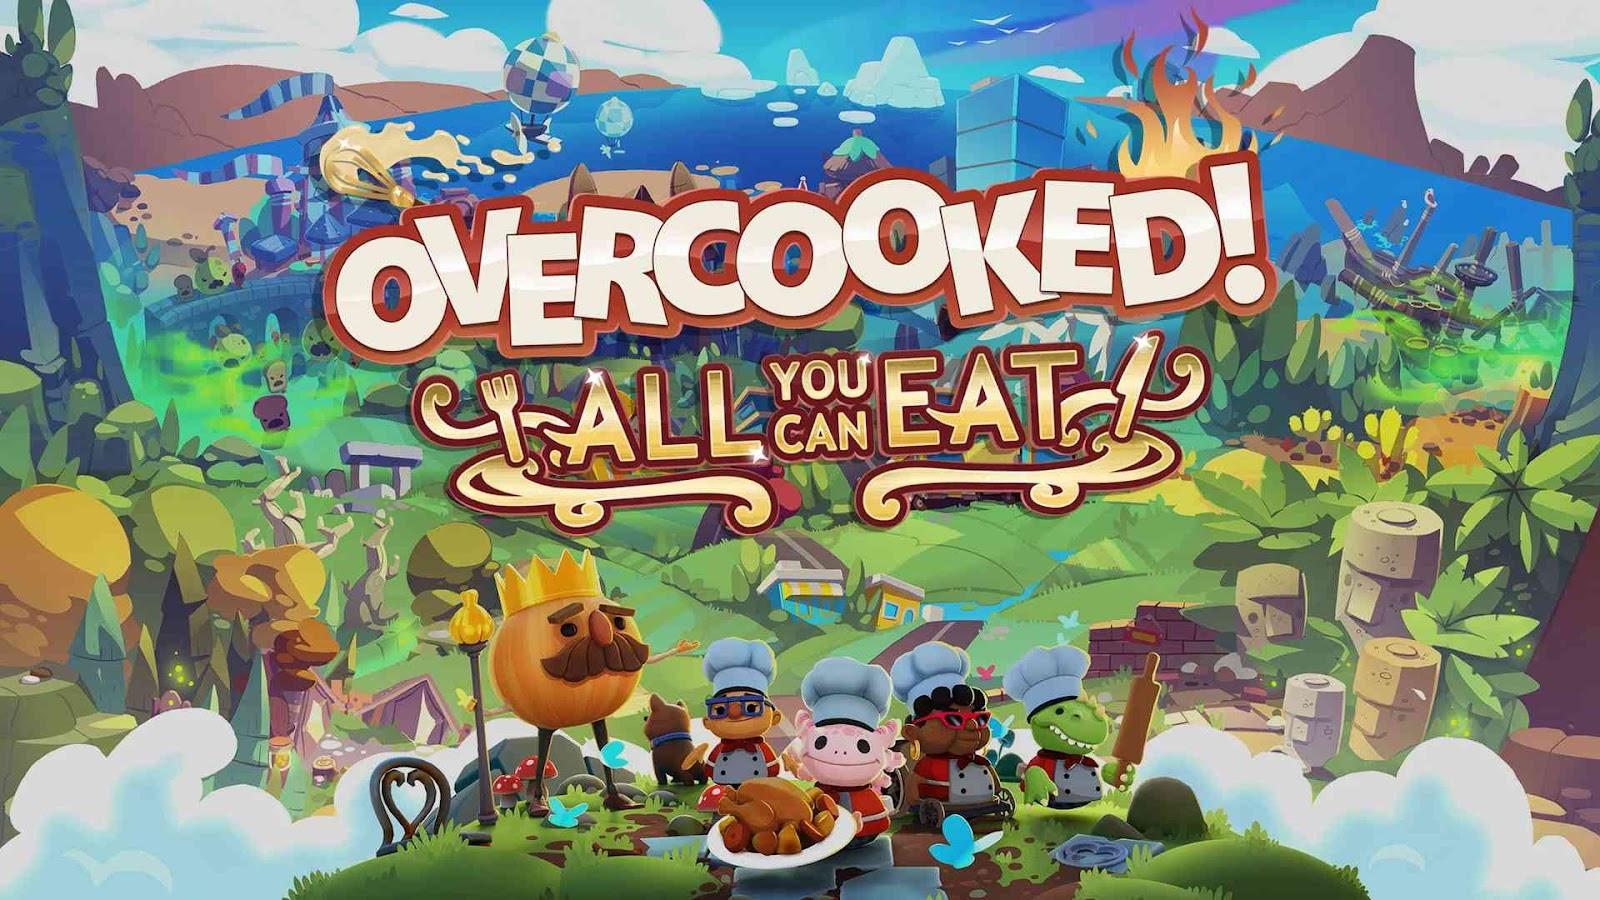 1.Overcooked All You Can Eat